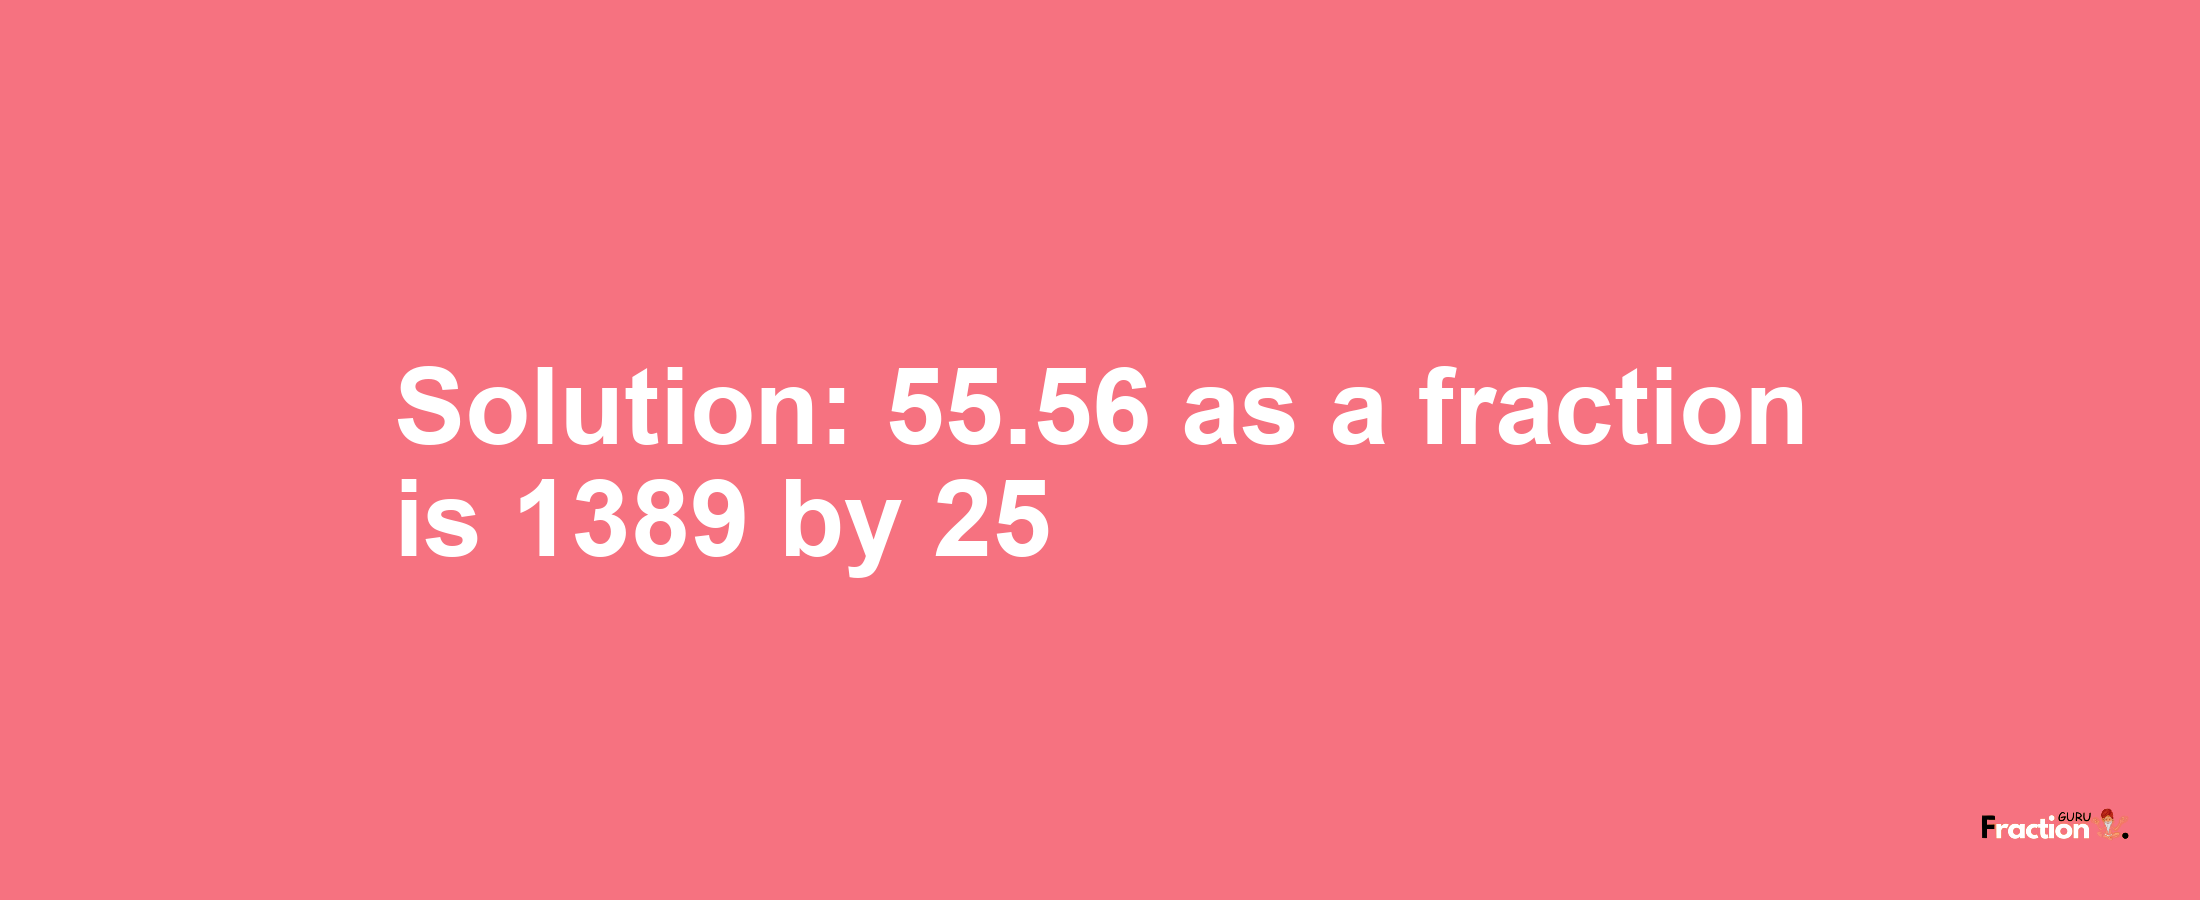 Solution:55.56 as a fraction is 1389/25